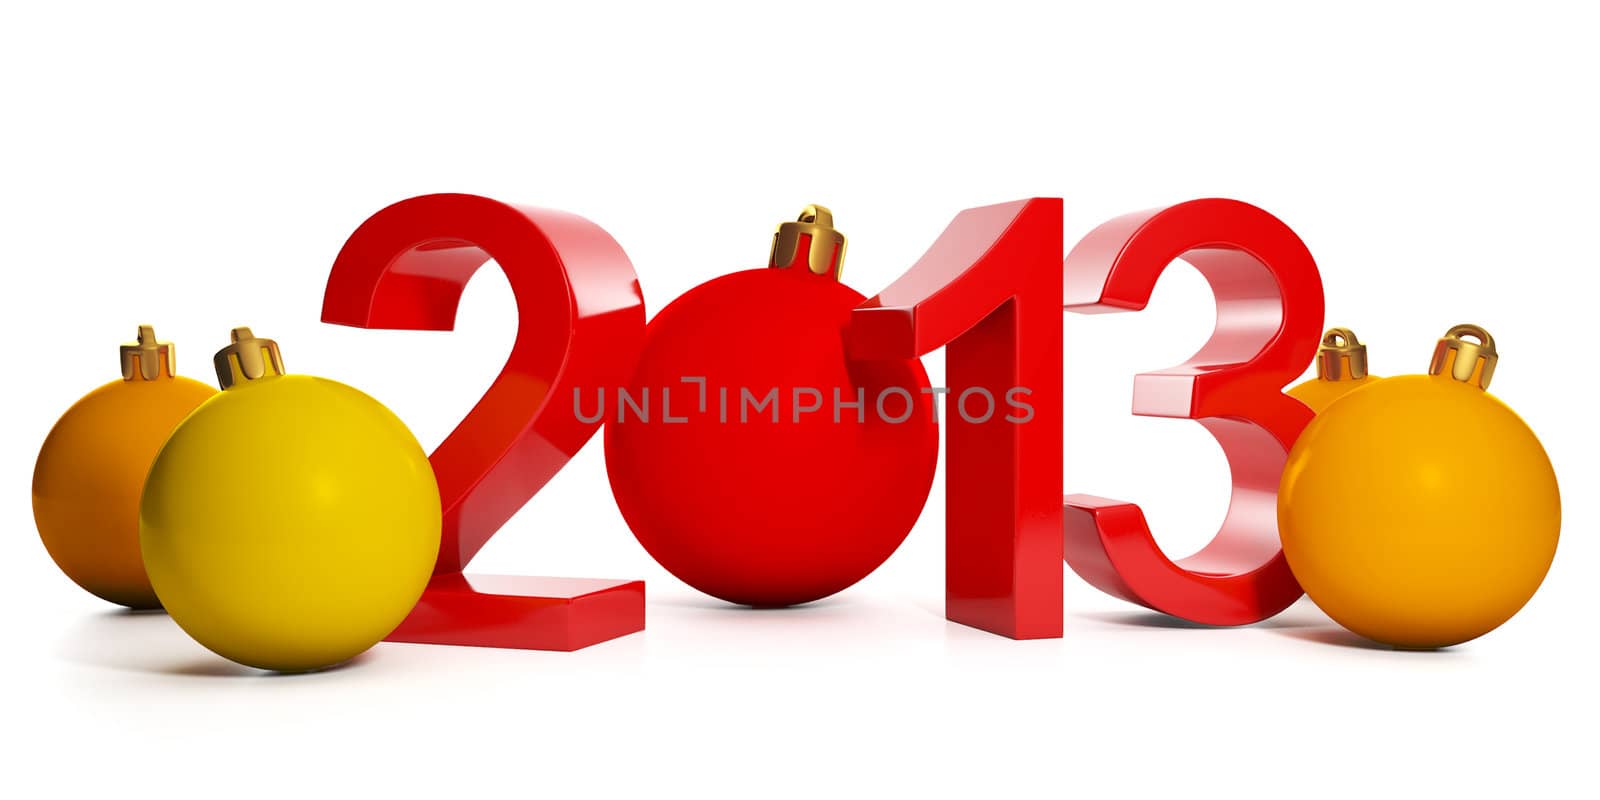 3d illustration: New Year and Christmas. In 2013 and a group of Christmas decorations